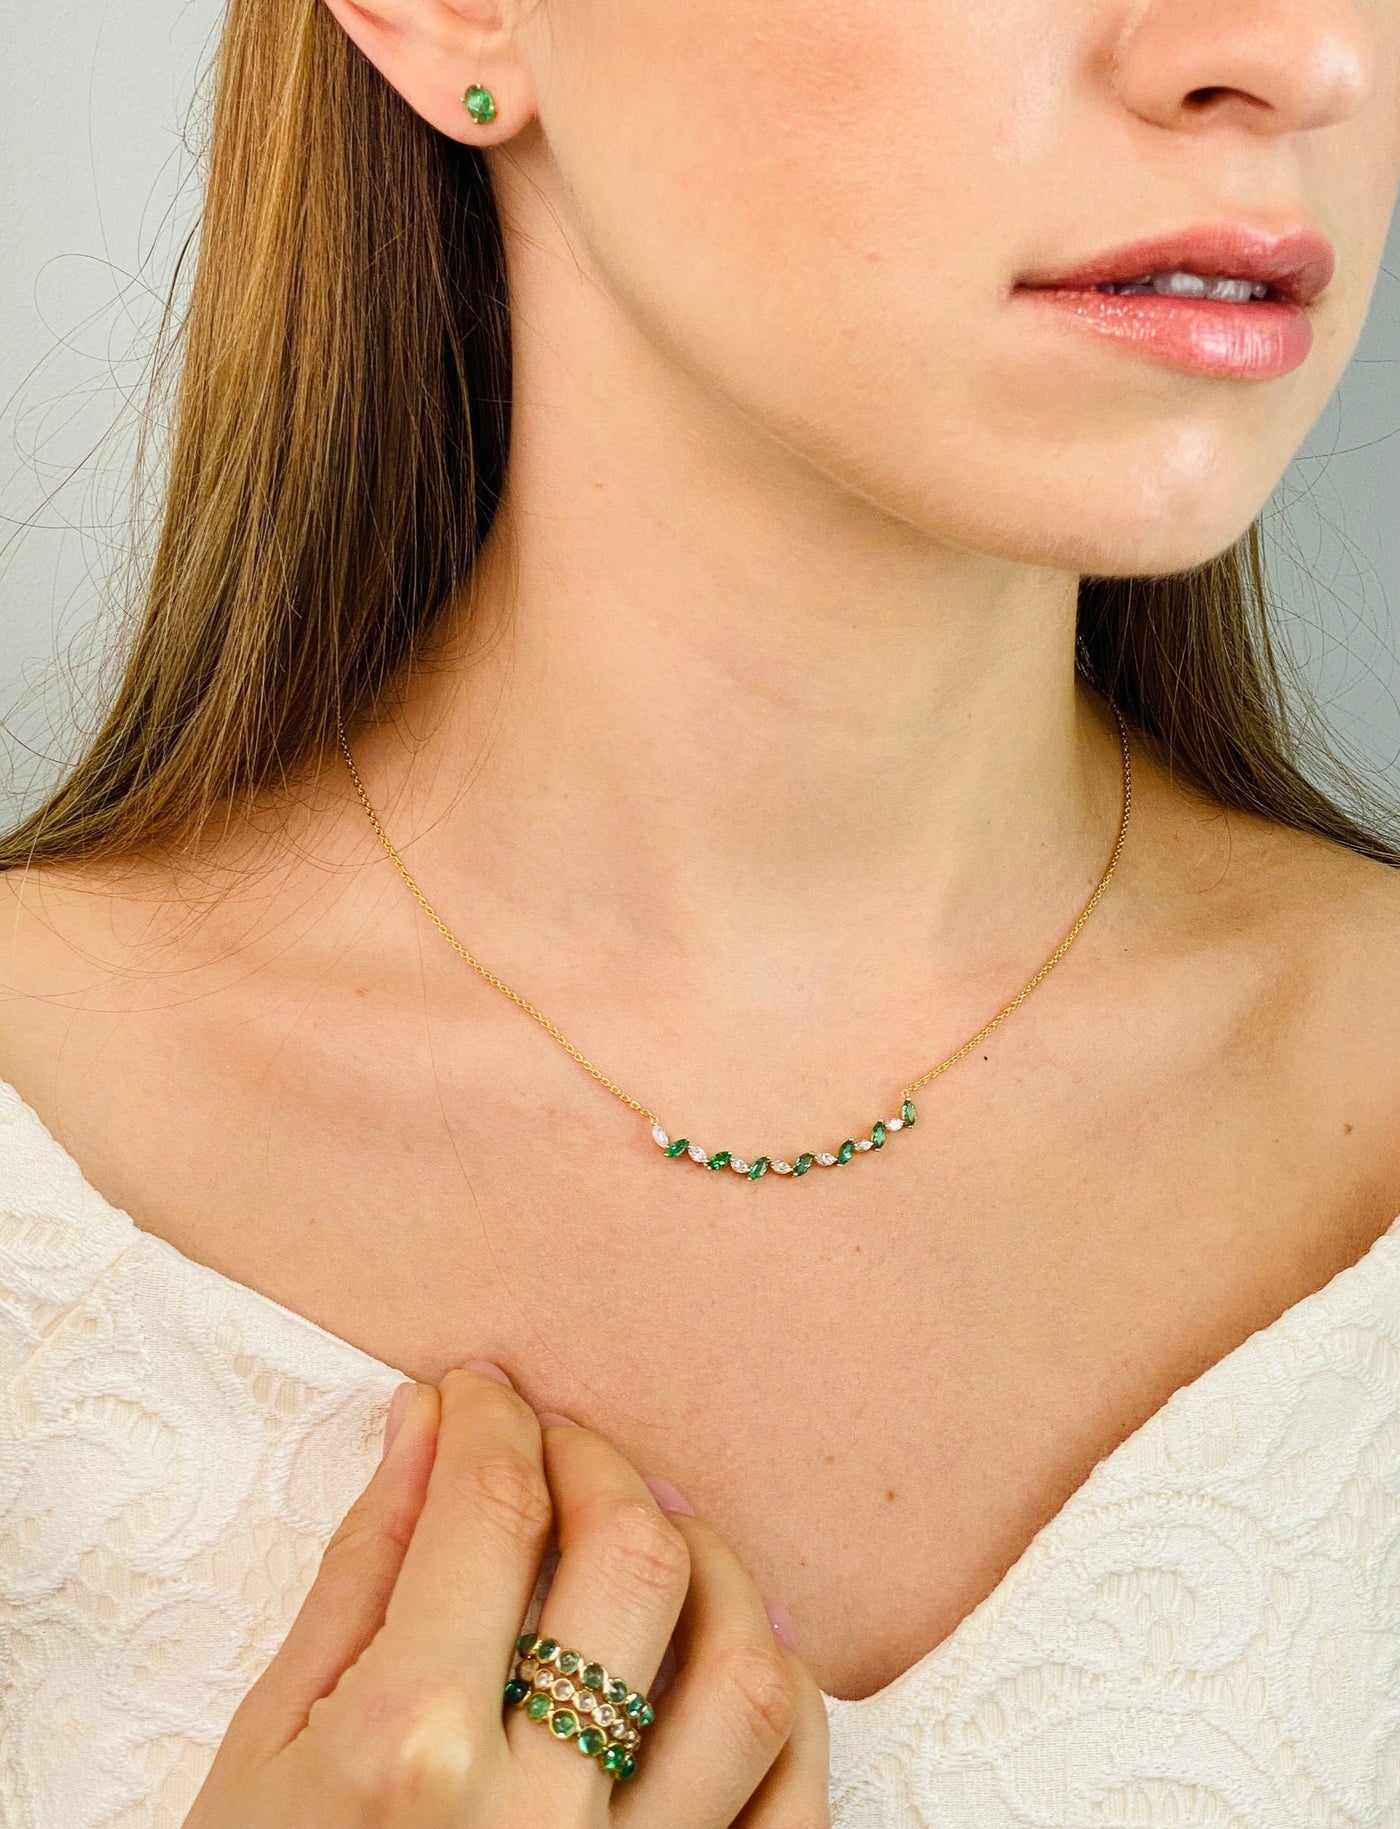 Emerald Marquise And Diamond Necklace In 18K Yellow Gold